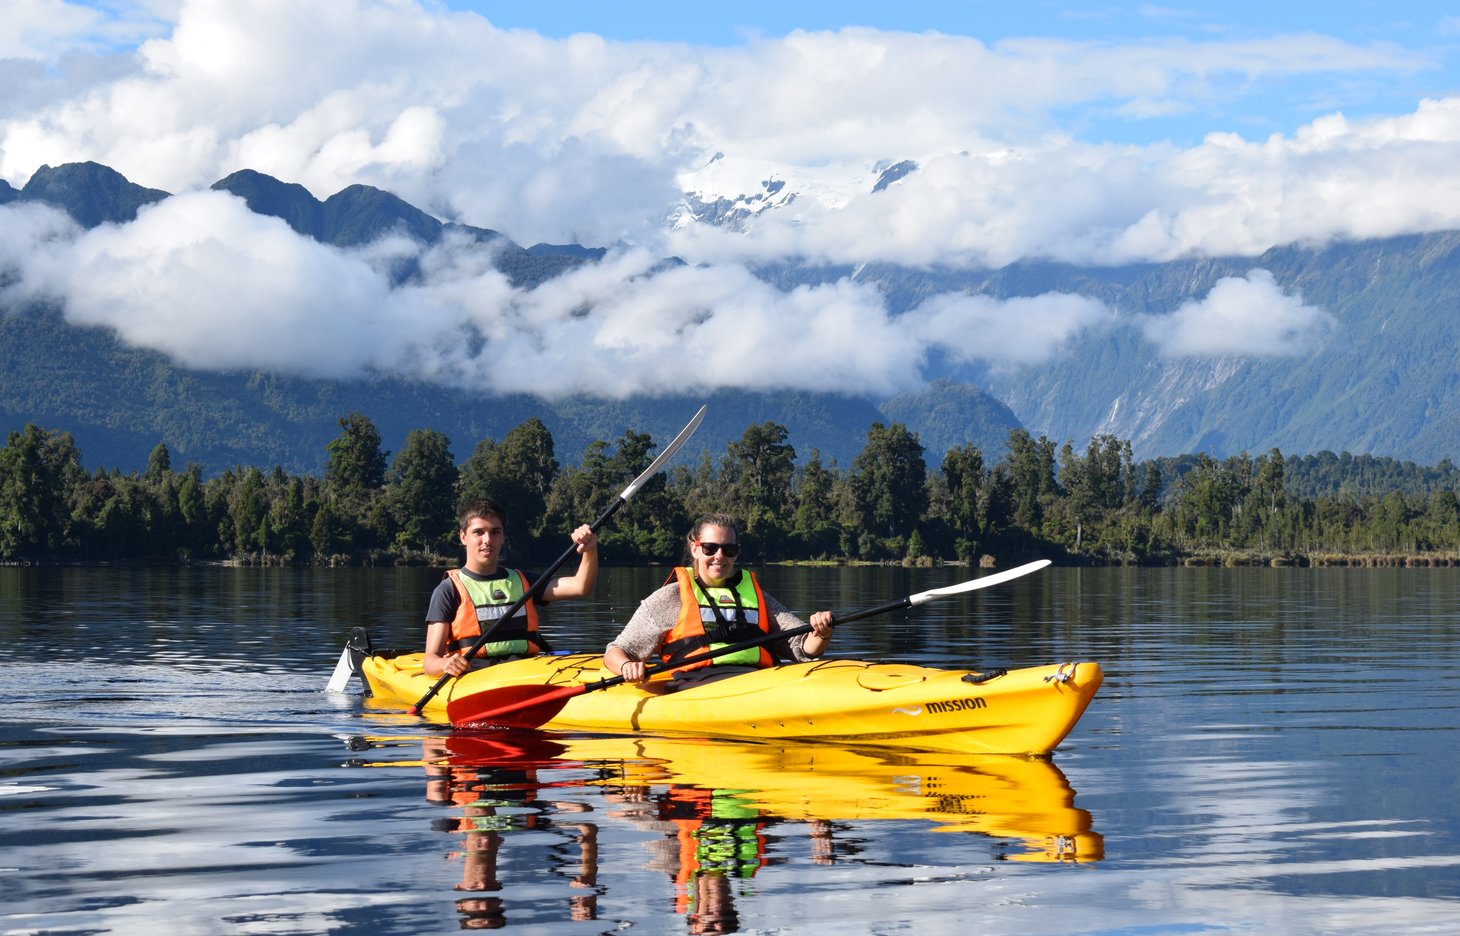 Kayaking in glacier country